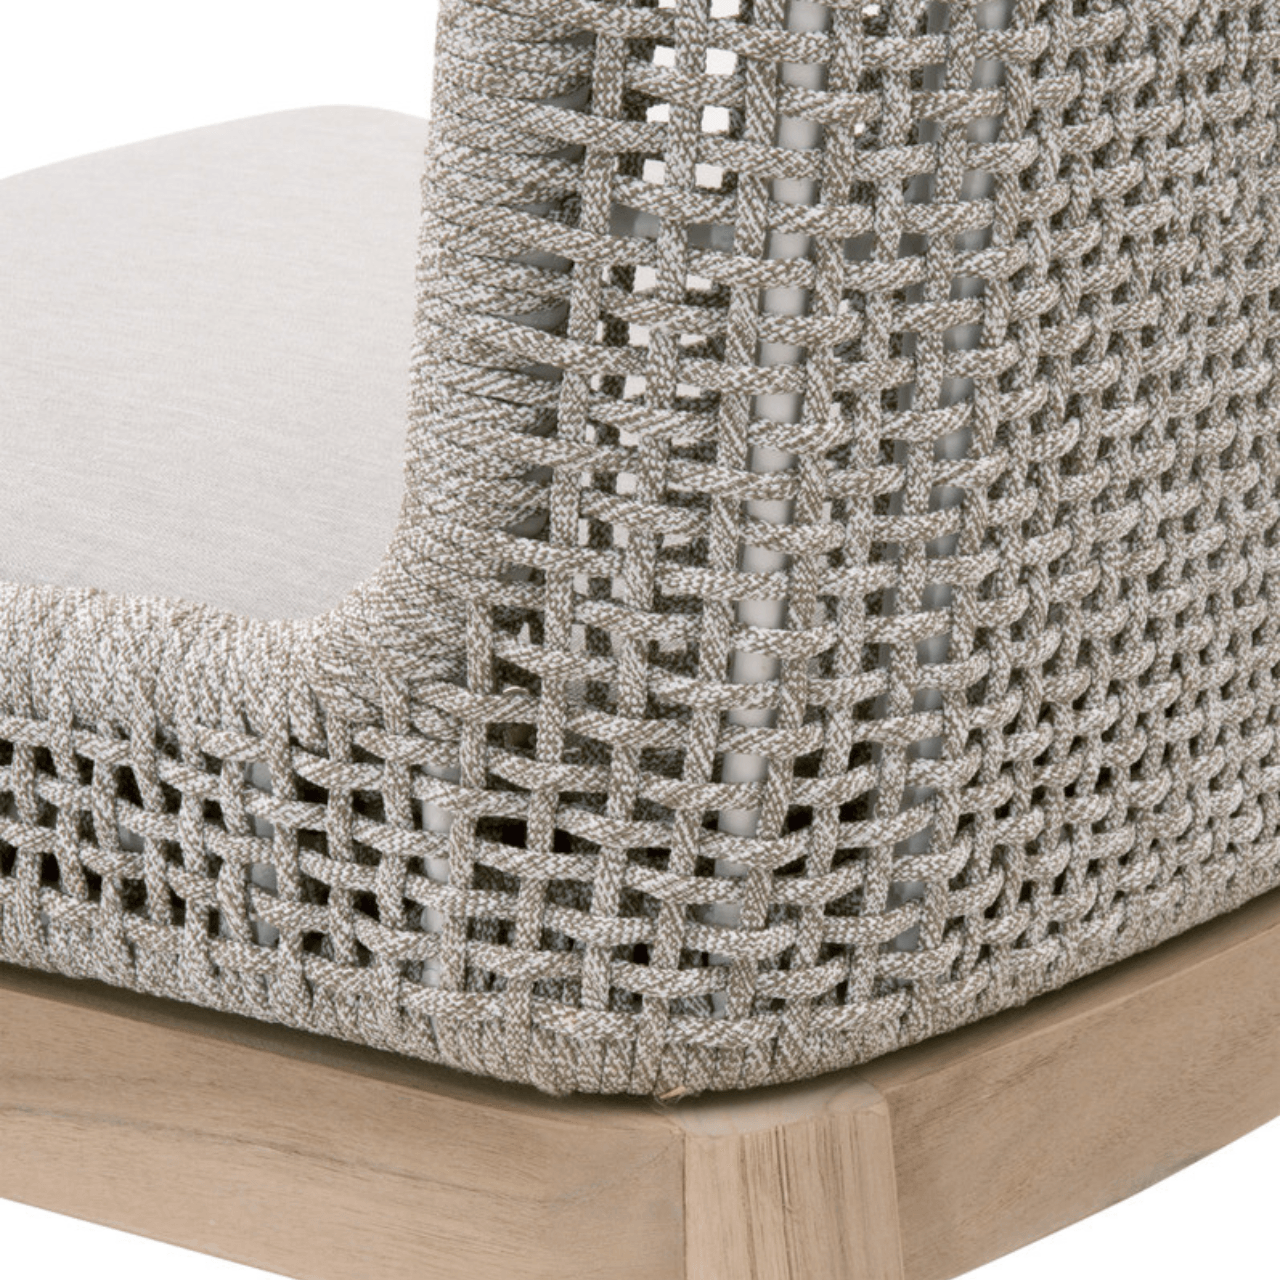 Woven Mesh Outdoor Chairs | Set of 2